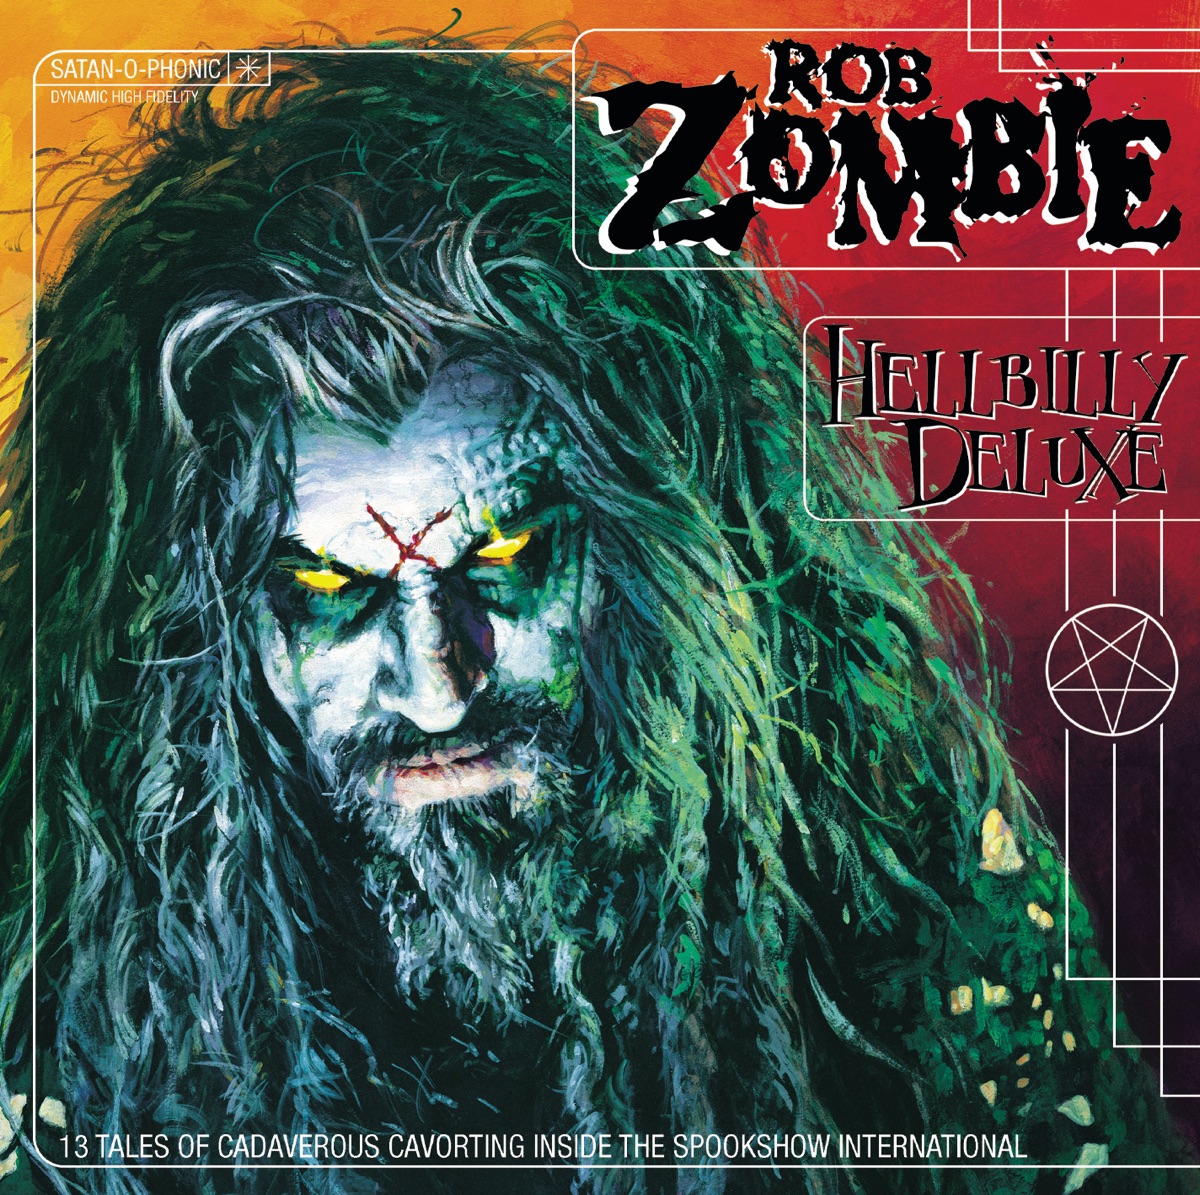 Educated Horses by Rob Zombie on Apple Music